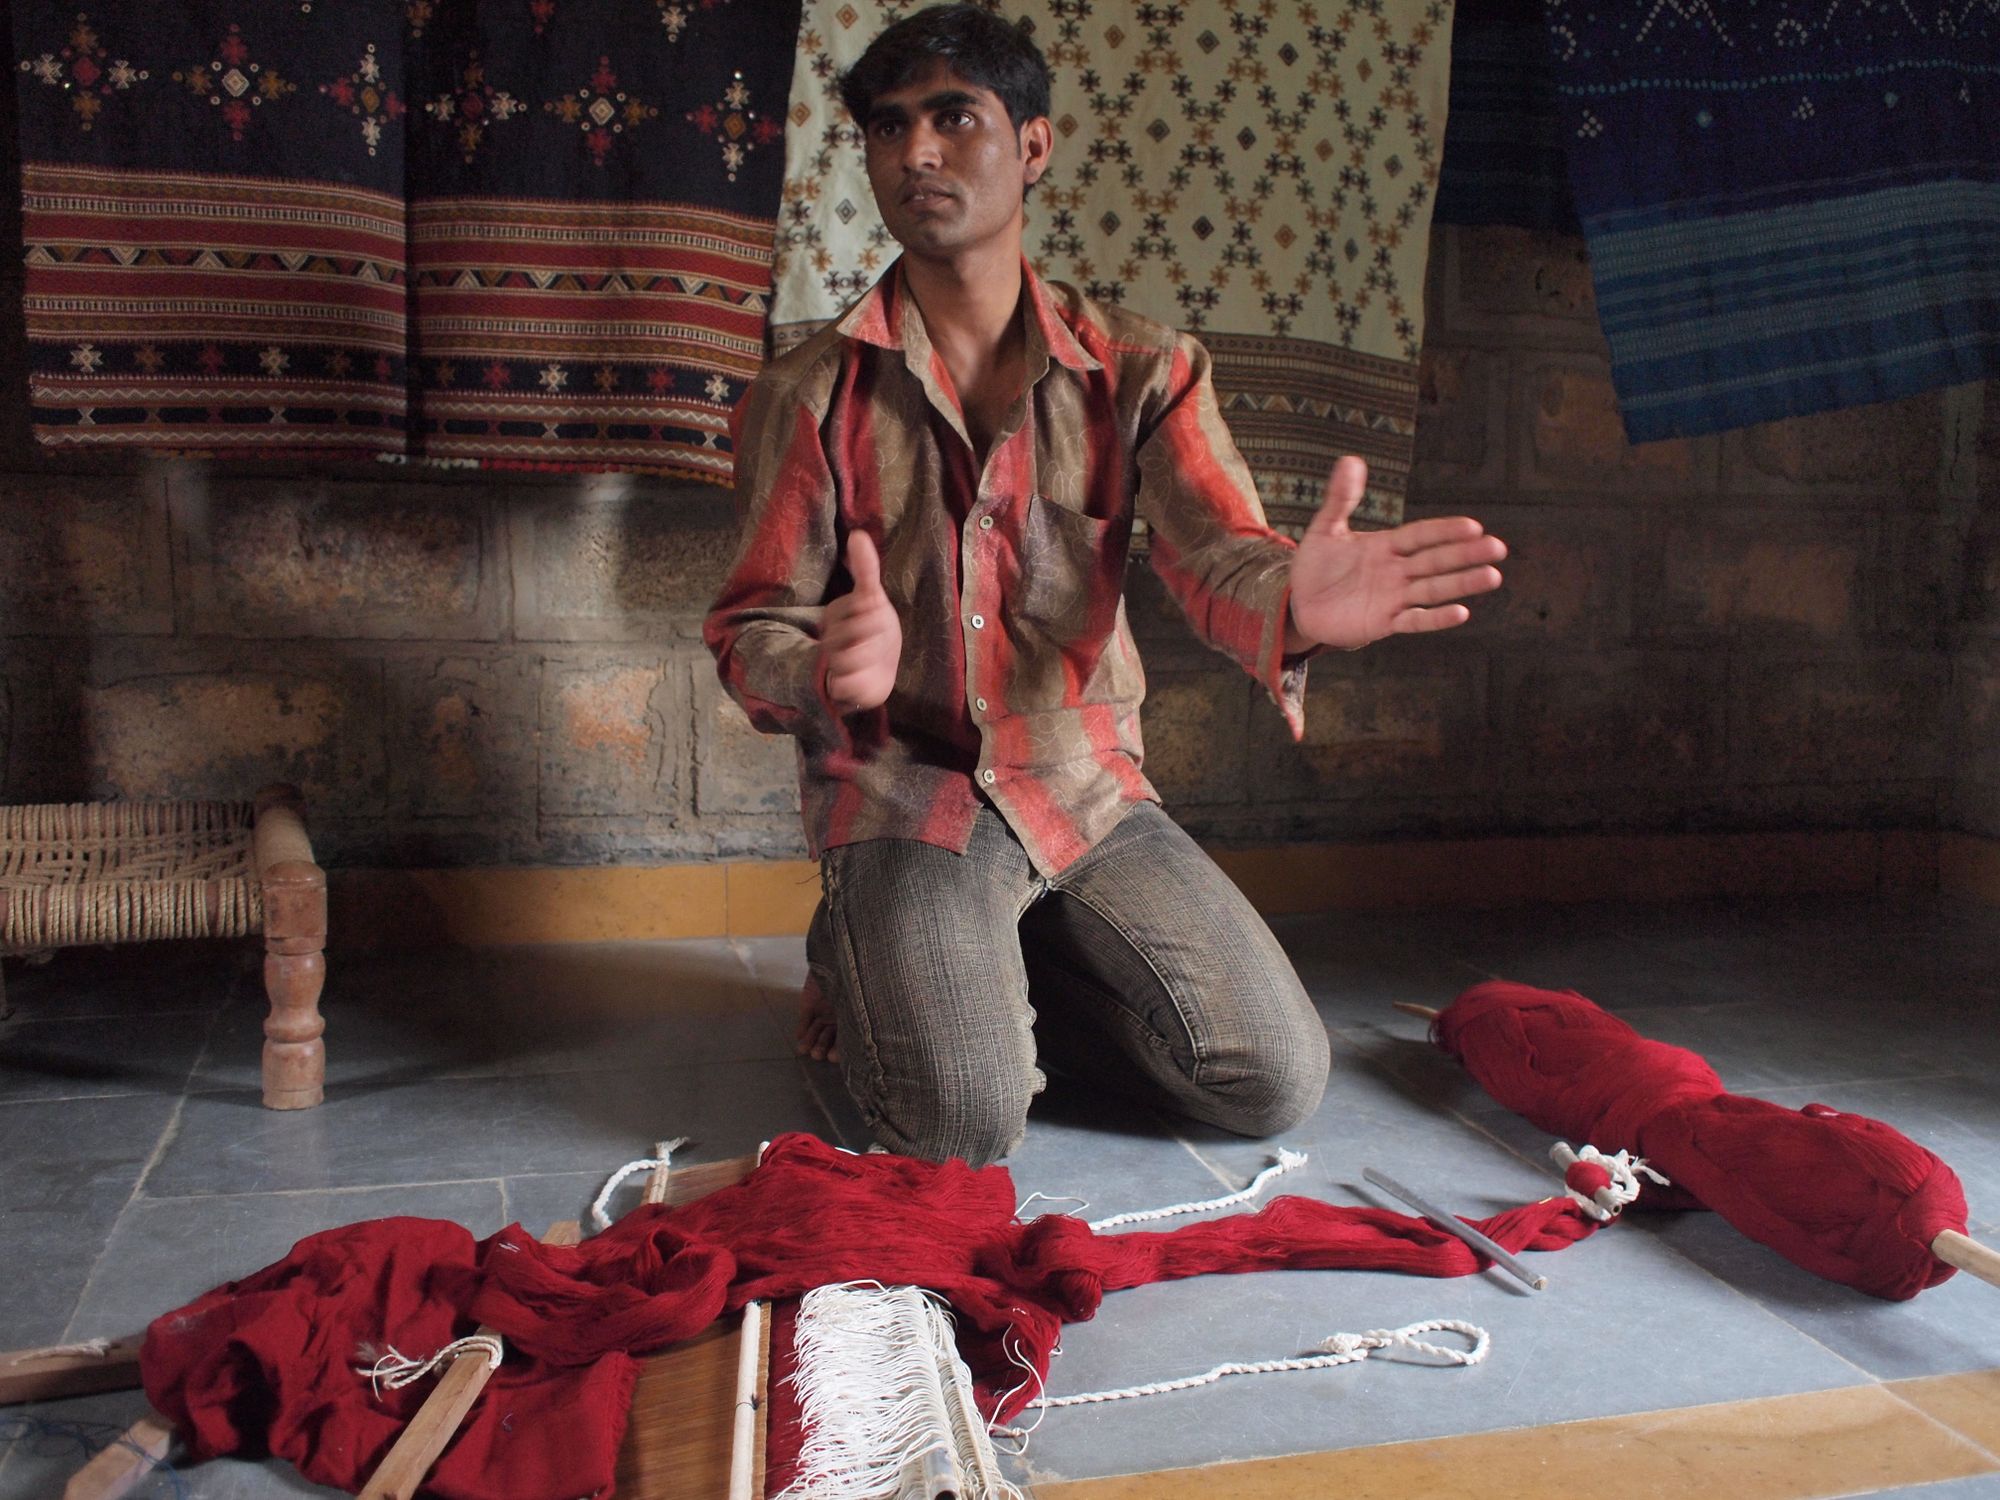 A man in red and brown shirt kneels on a grey stone floor, in front of him are pieces of a loom and a spool of bright red threads.